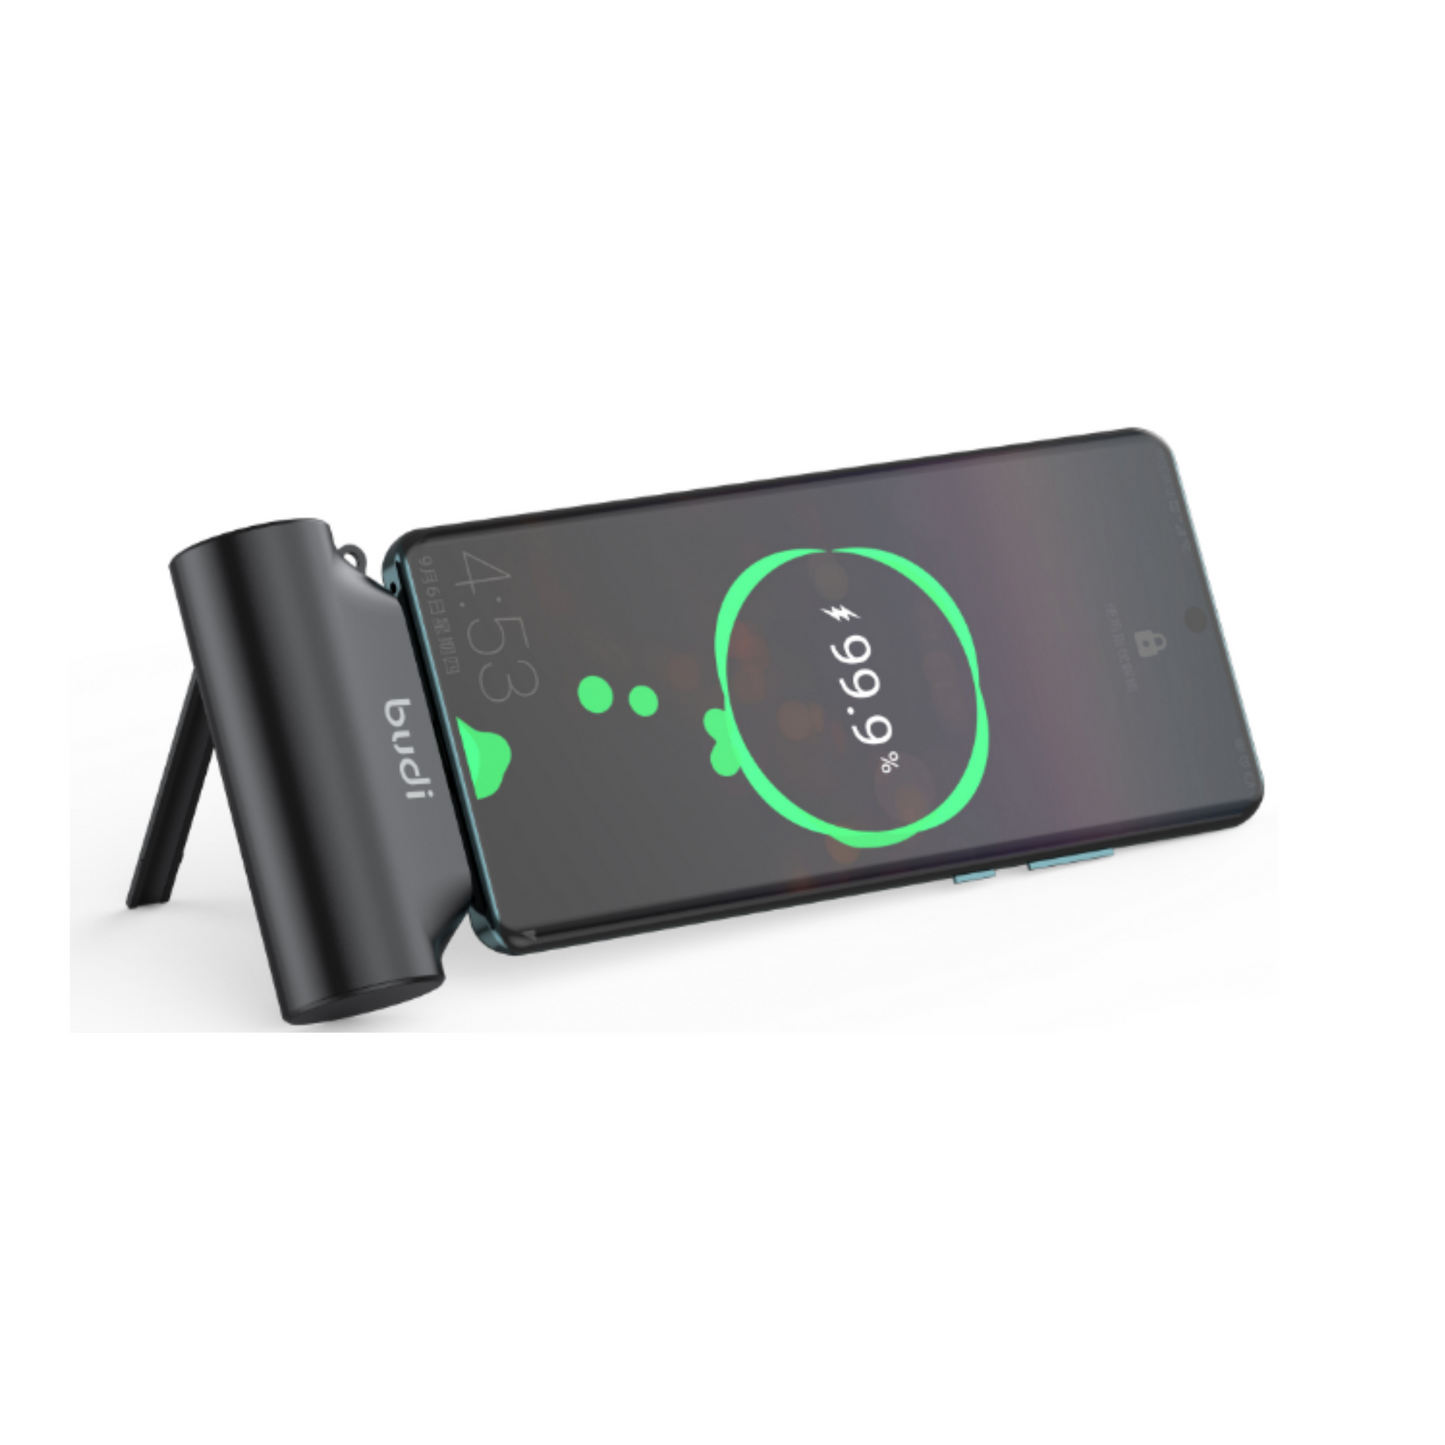 Budi Power Bank  5000mAh With Built-in Lightning Connector